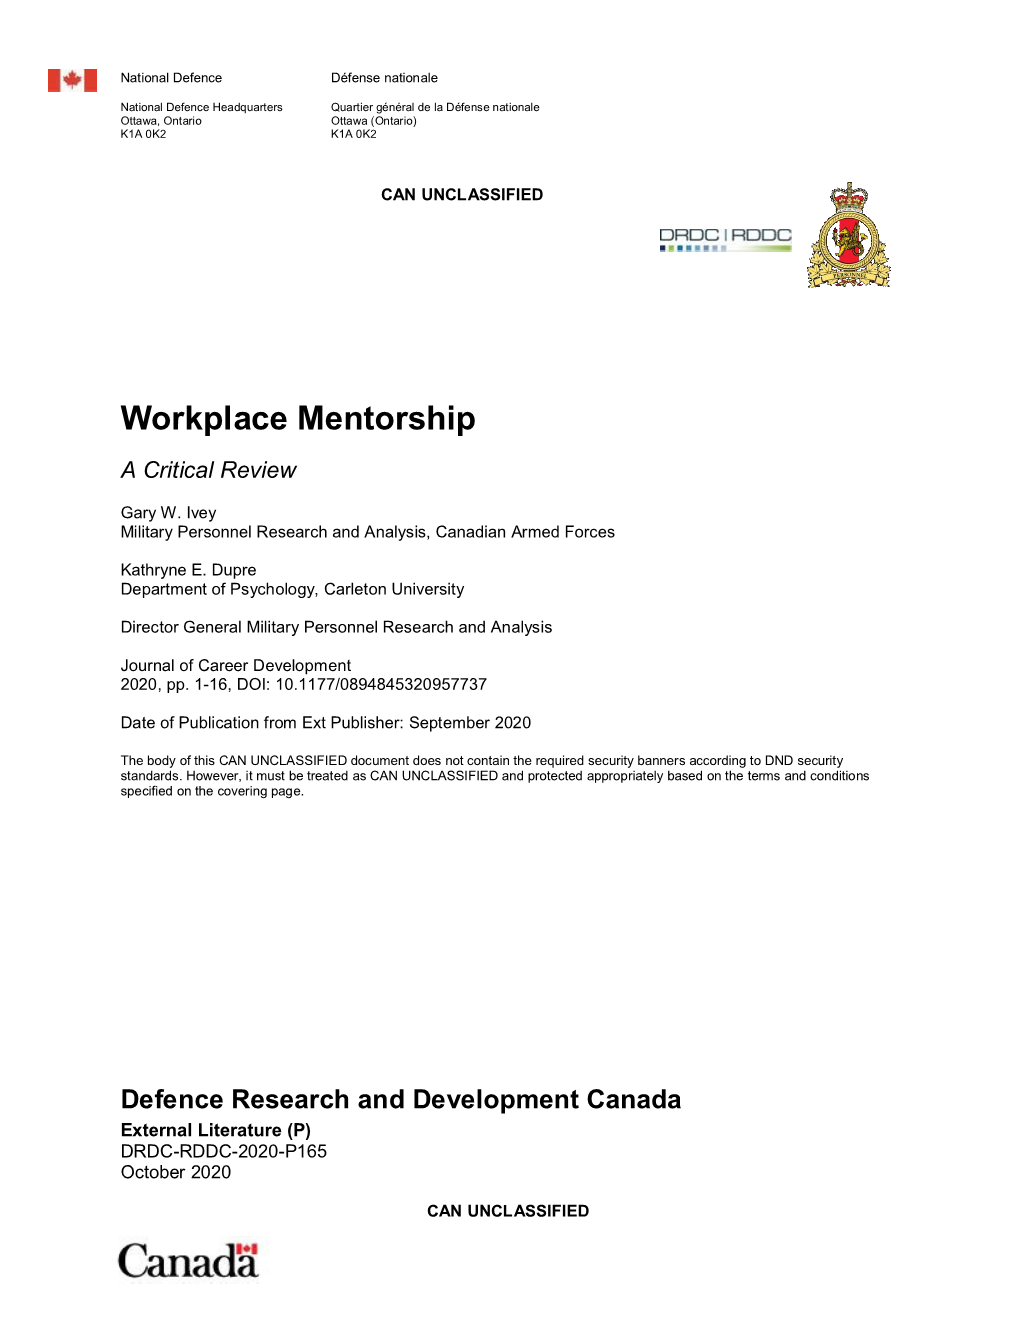 Workplace Mentorship a Critical Review